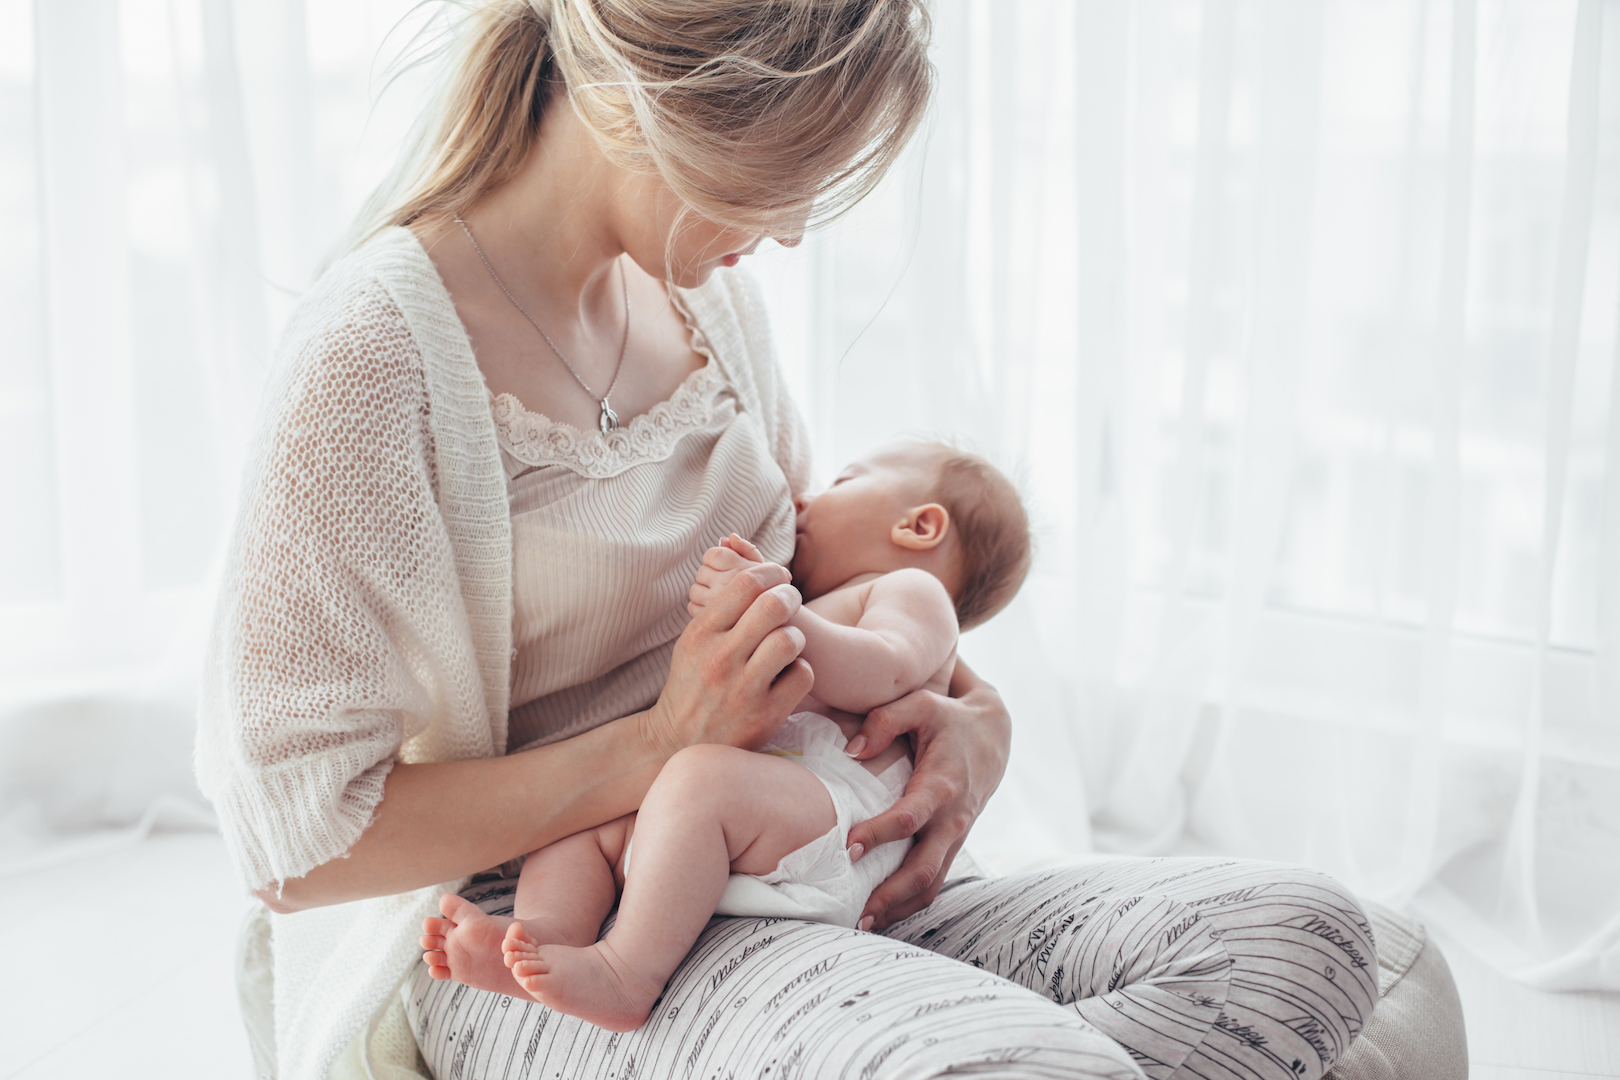 Breastfeeding provides passive and likely long-lasting active immunity.